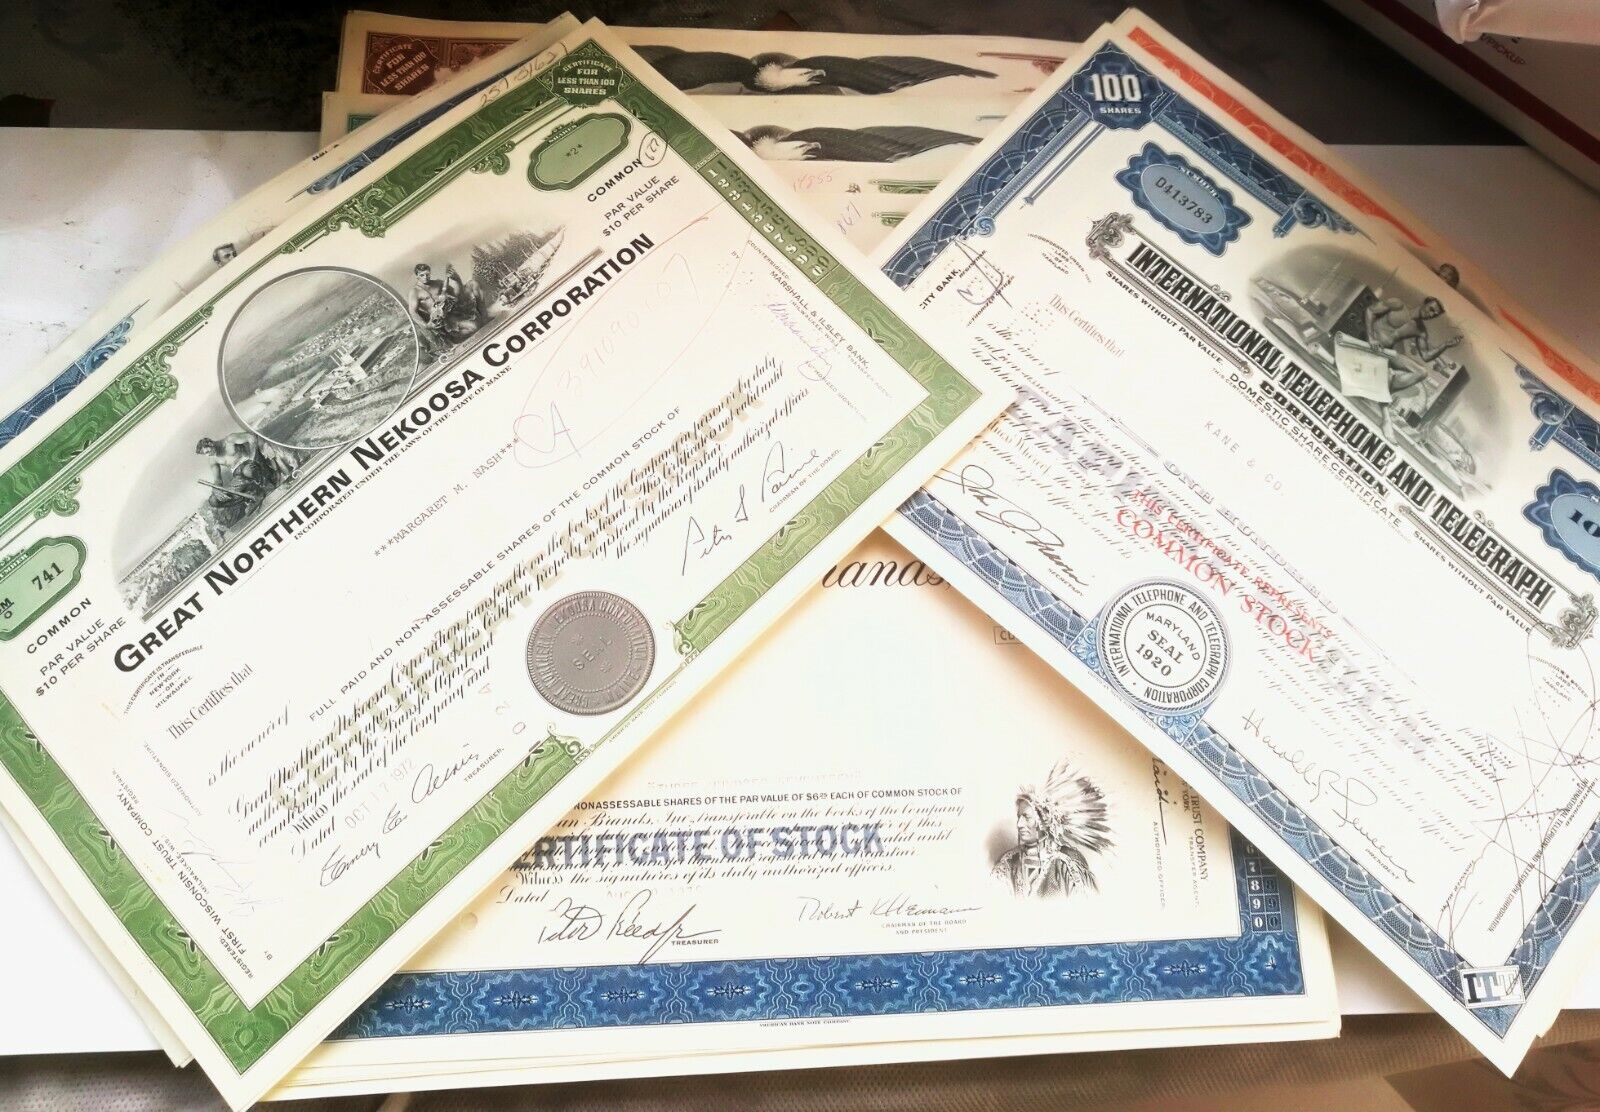 Lot of 10 old vintage stock certificates from different years-1930's-1970's ! Без бренда - фотография #8